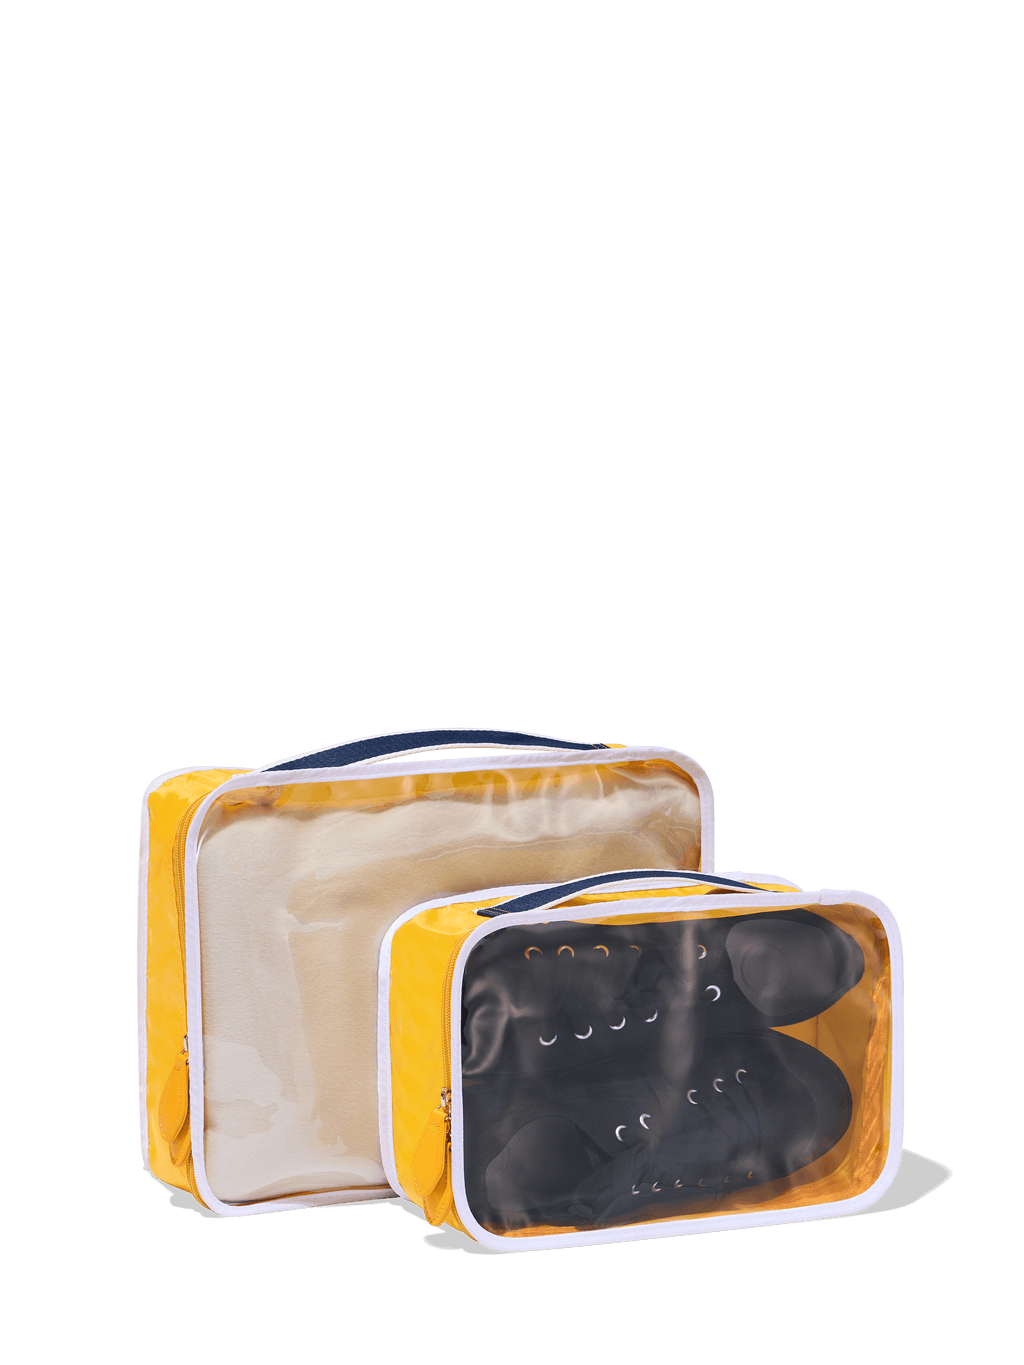 Paravel Full View Packing Cube Duo Canyon Yellow